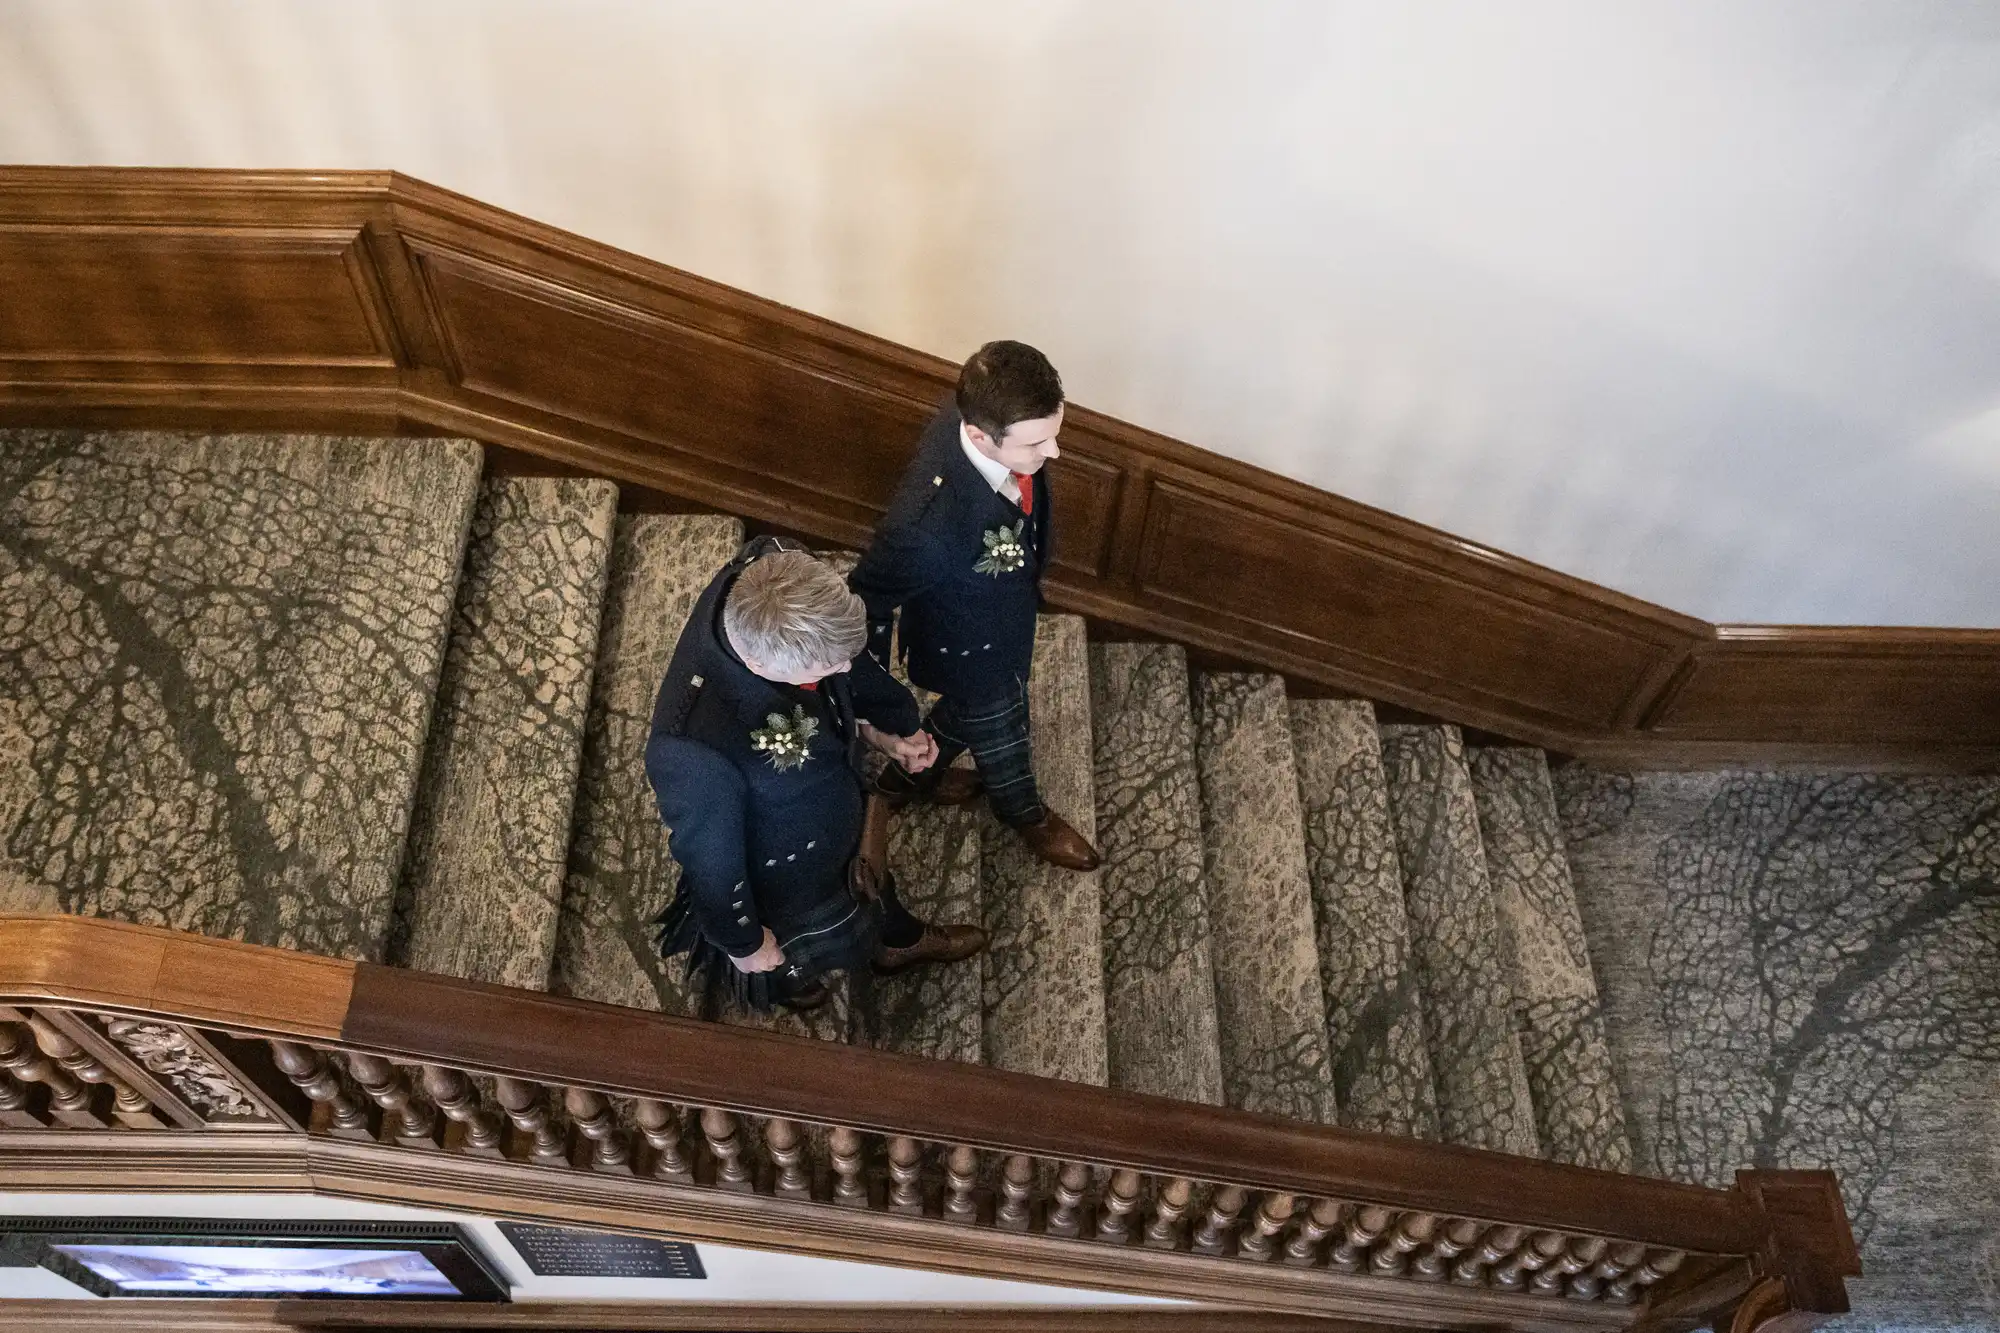 Two men in formal attire descend a carpeted staircase with wooden bannisters.